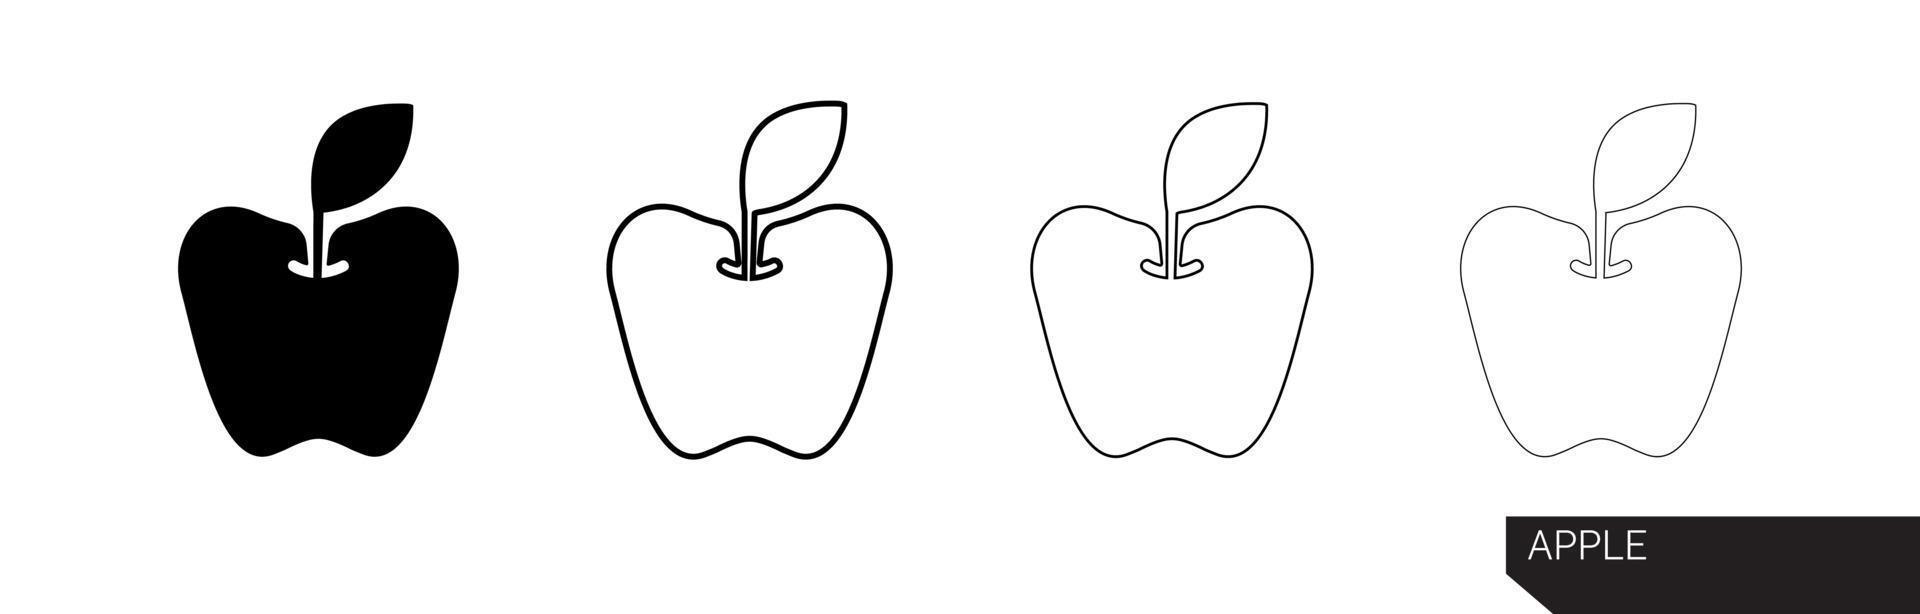 Apple icon. Apple silhouette vector icon illustration in black color isolated on white background. Apple icon in different thicknesses. Modern line art design.